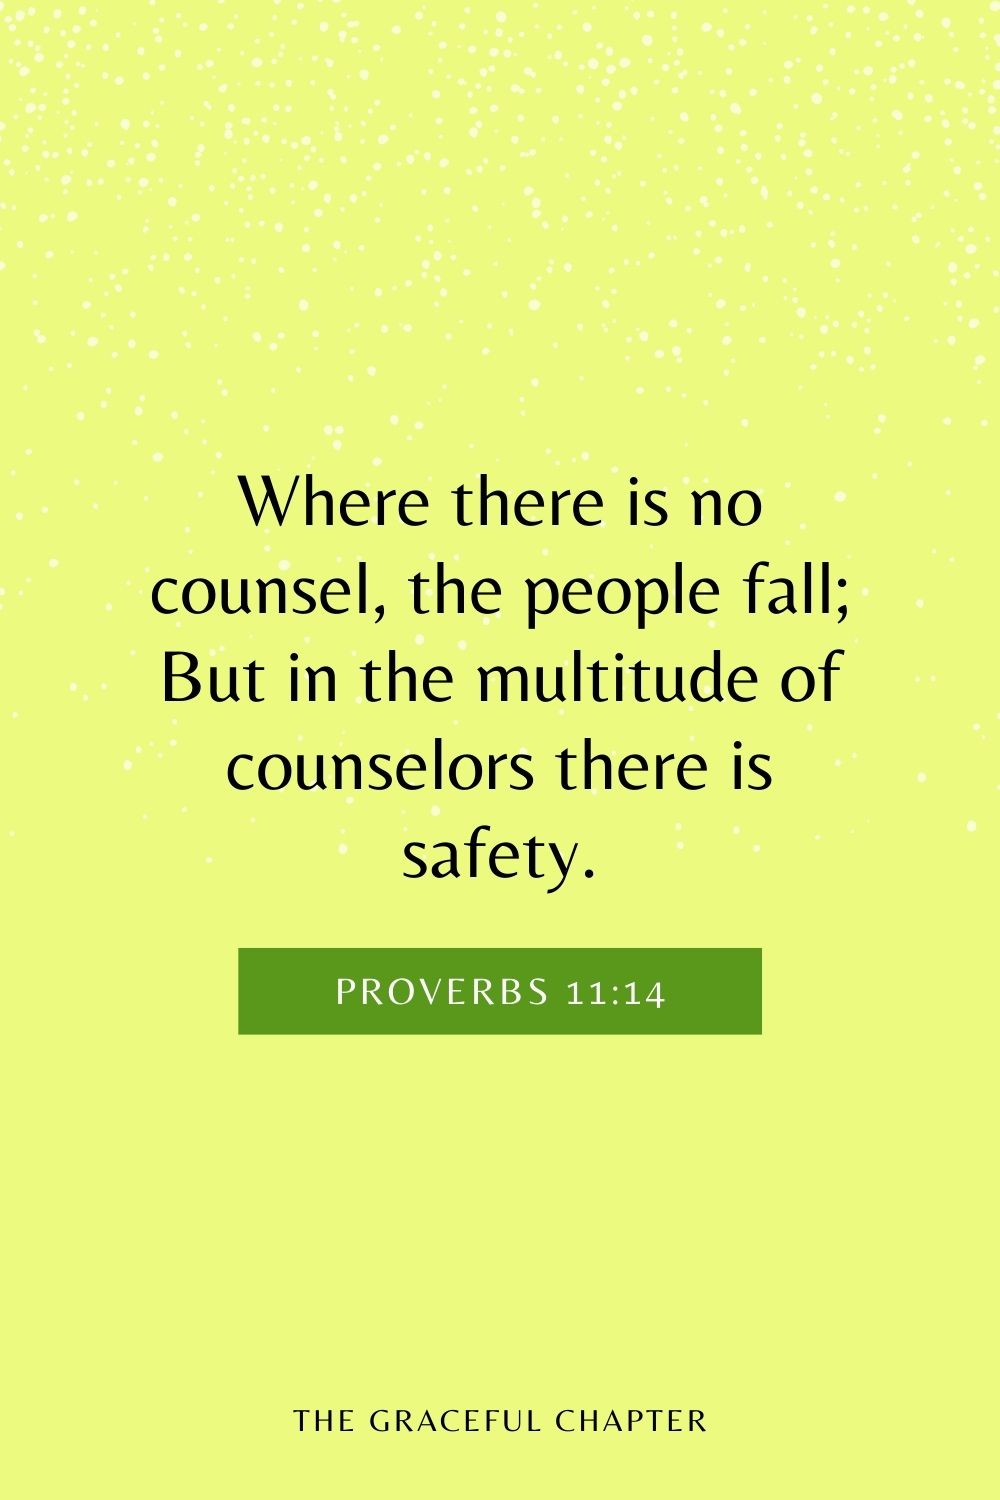 Where there is no counsel, the people fall; But in the multitude of counselors there is safety. Proverbs 11:14